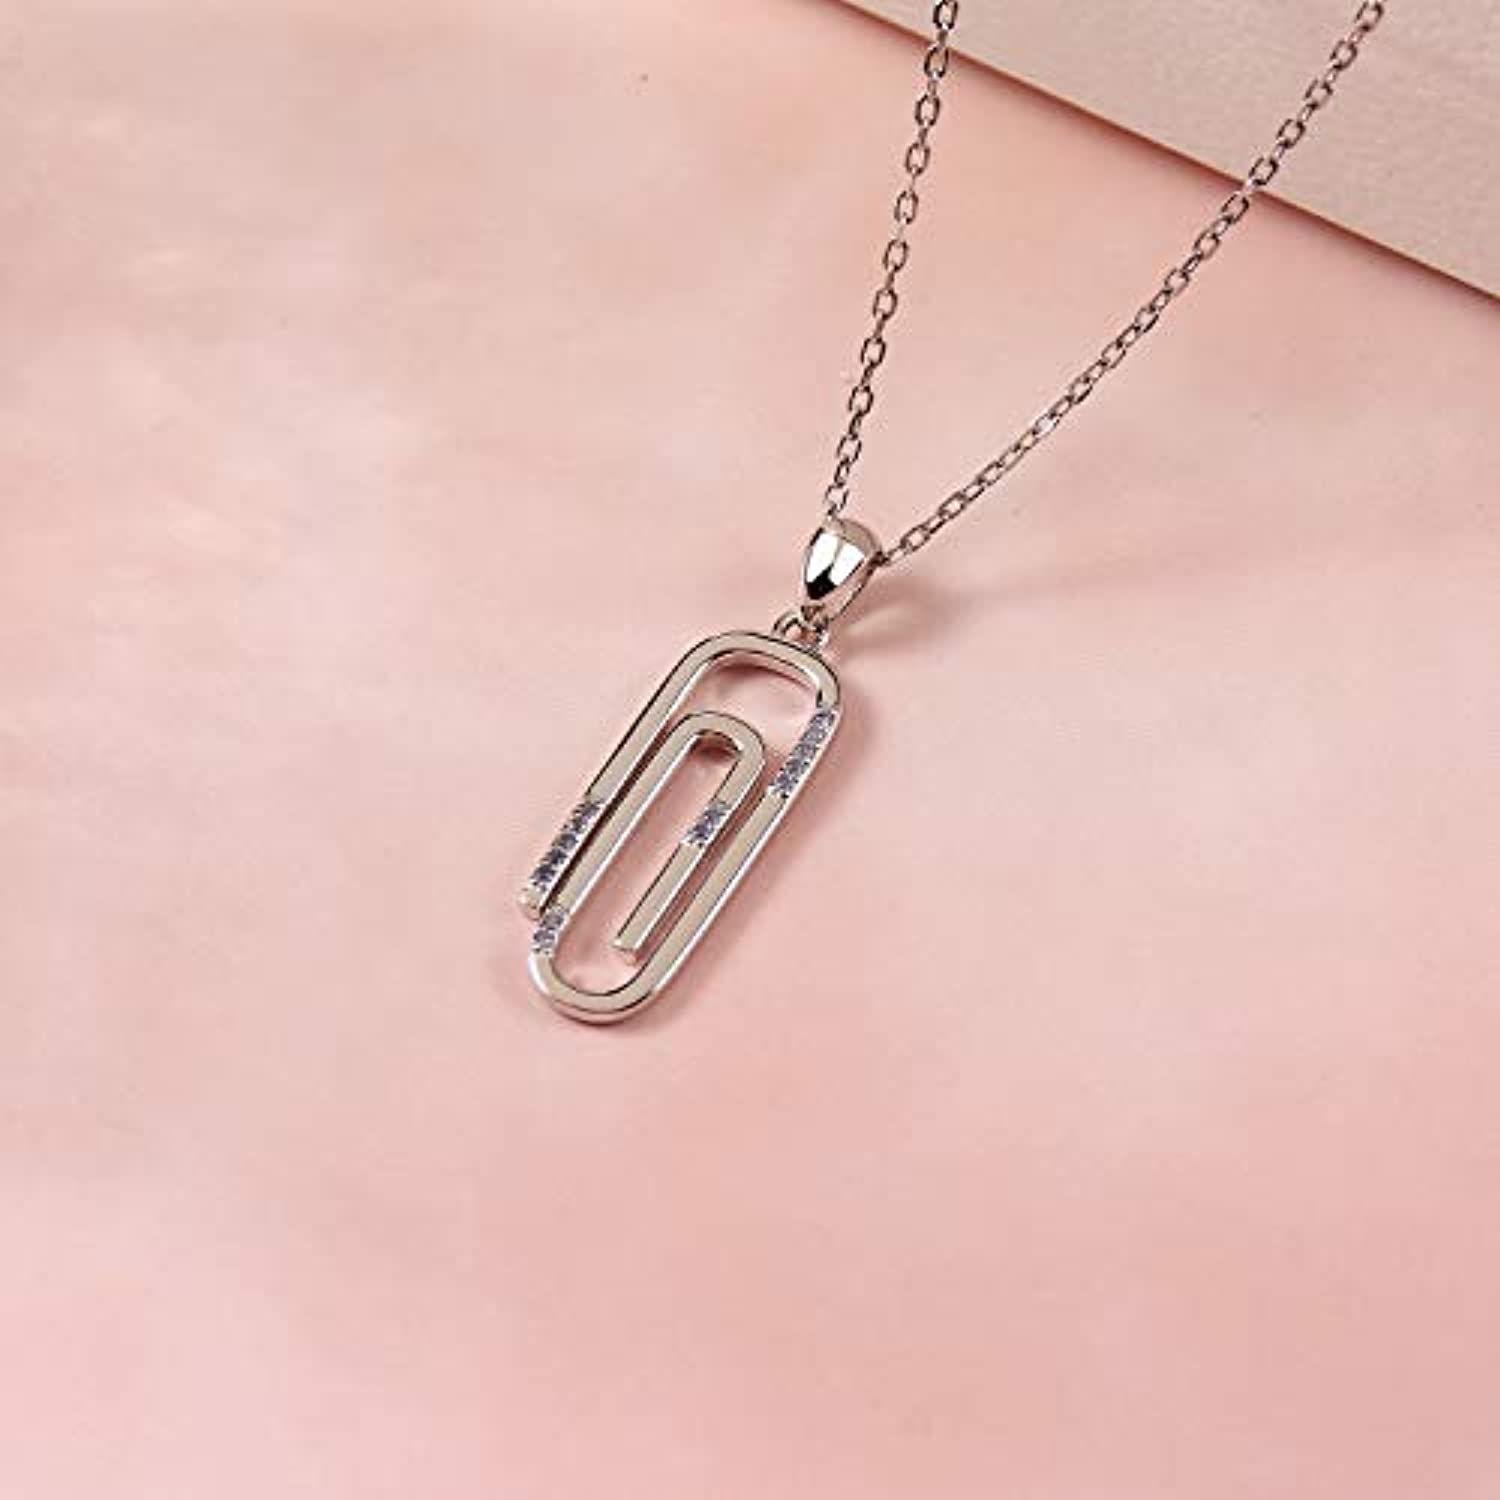 New ins Pink Flower Pendant Necklace For Women Girls Cute Pink Geometric  Zircon Necklaces Fashion Jewelry Gift